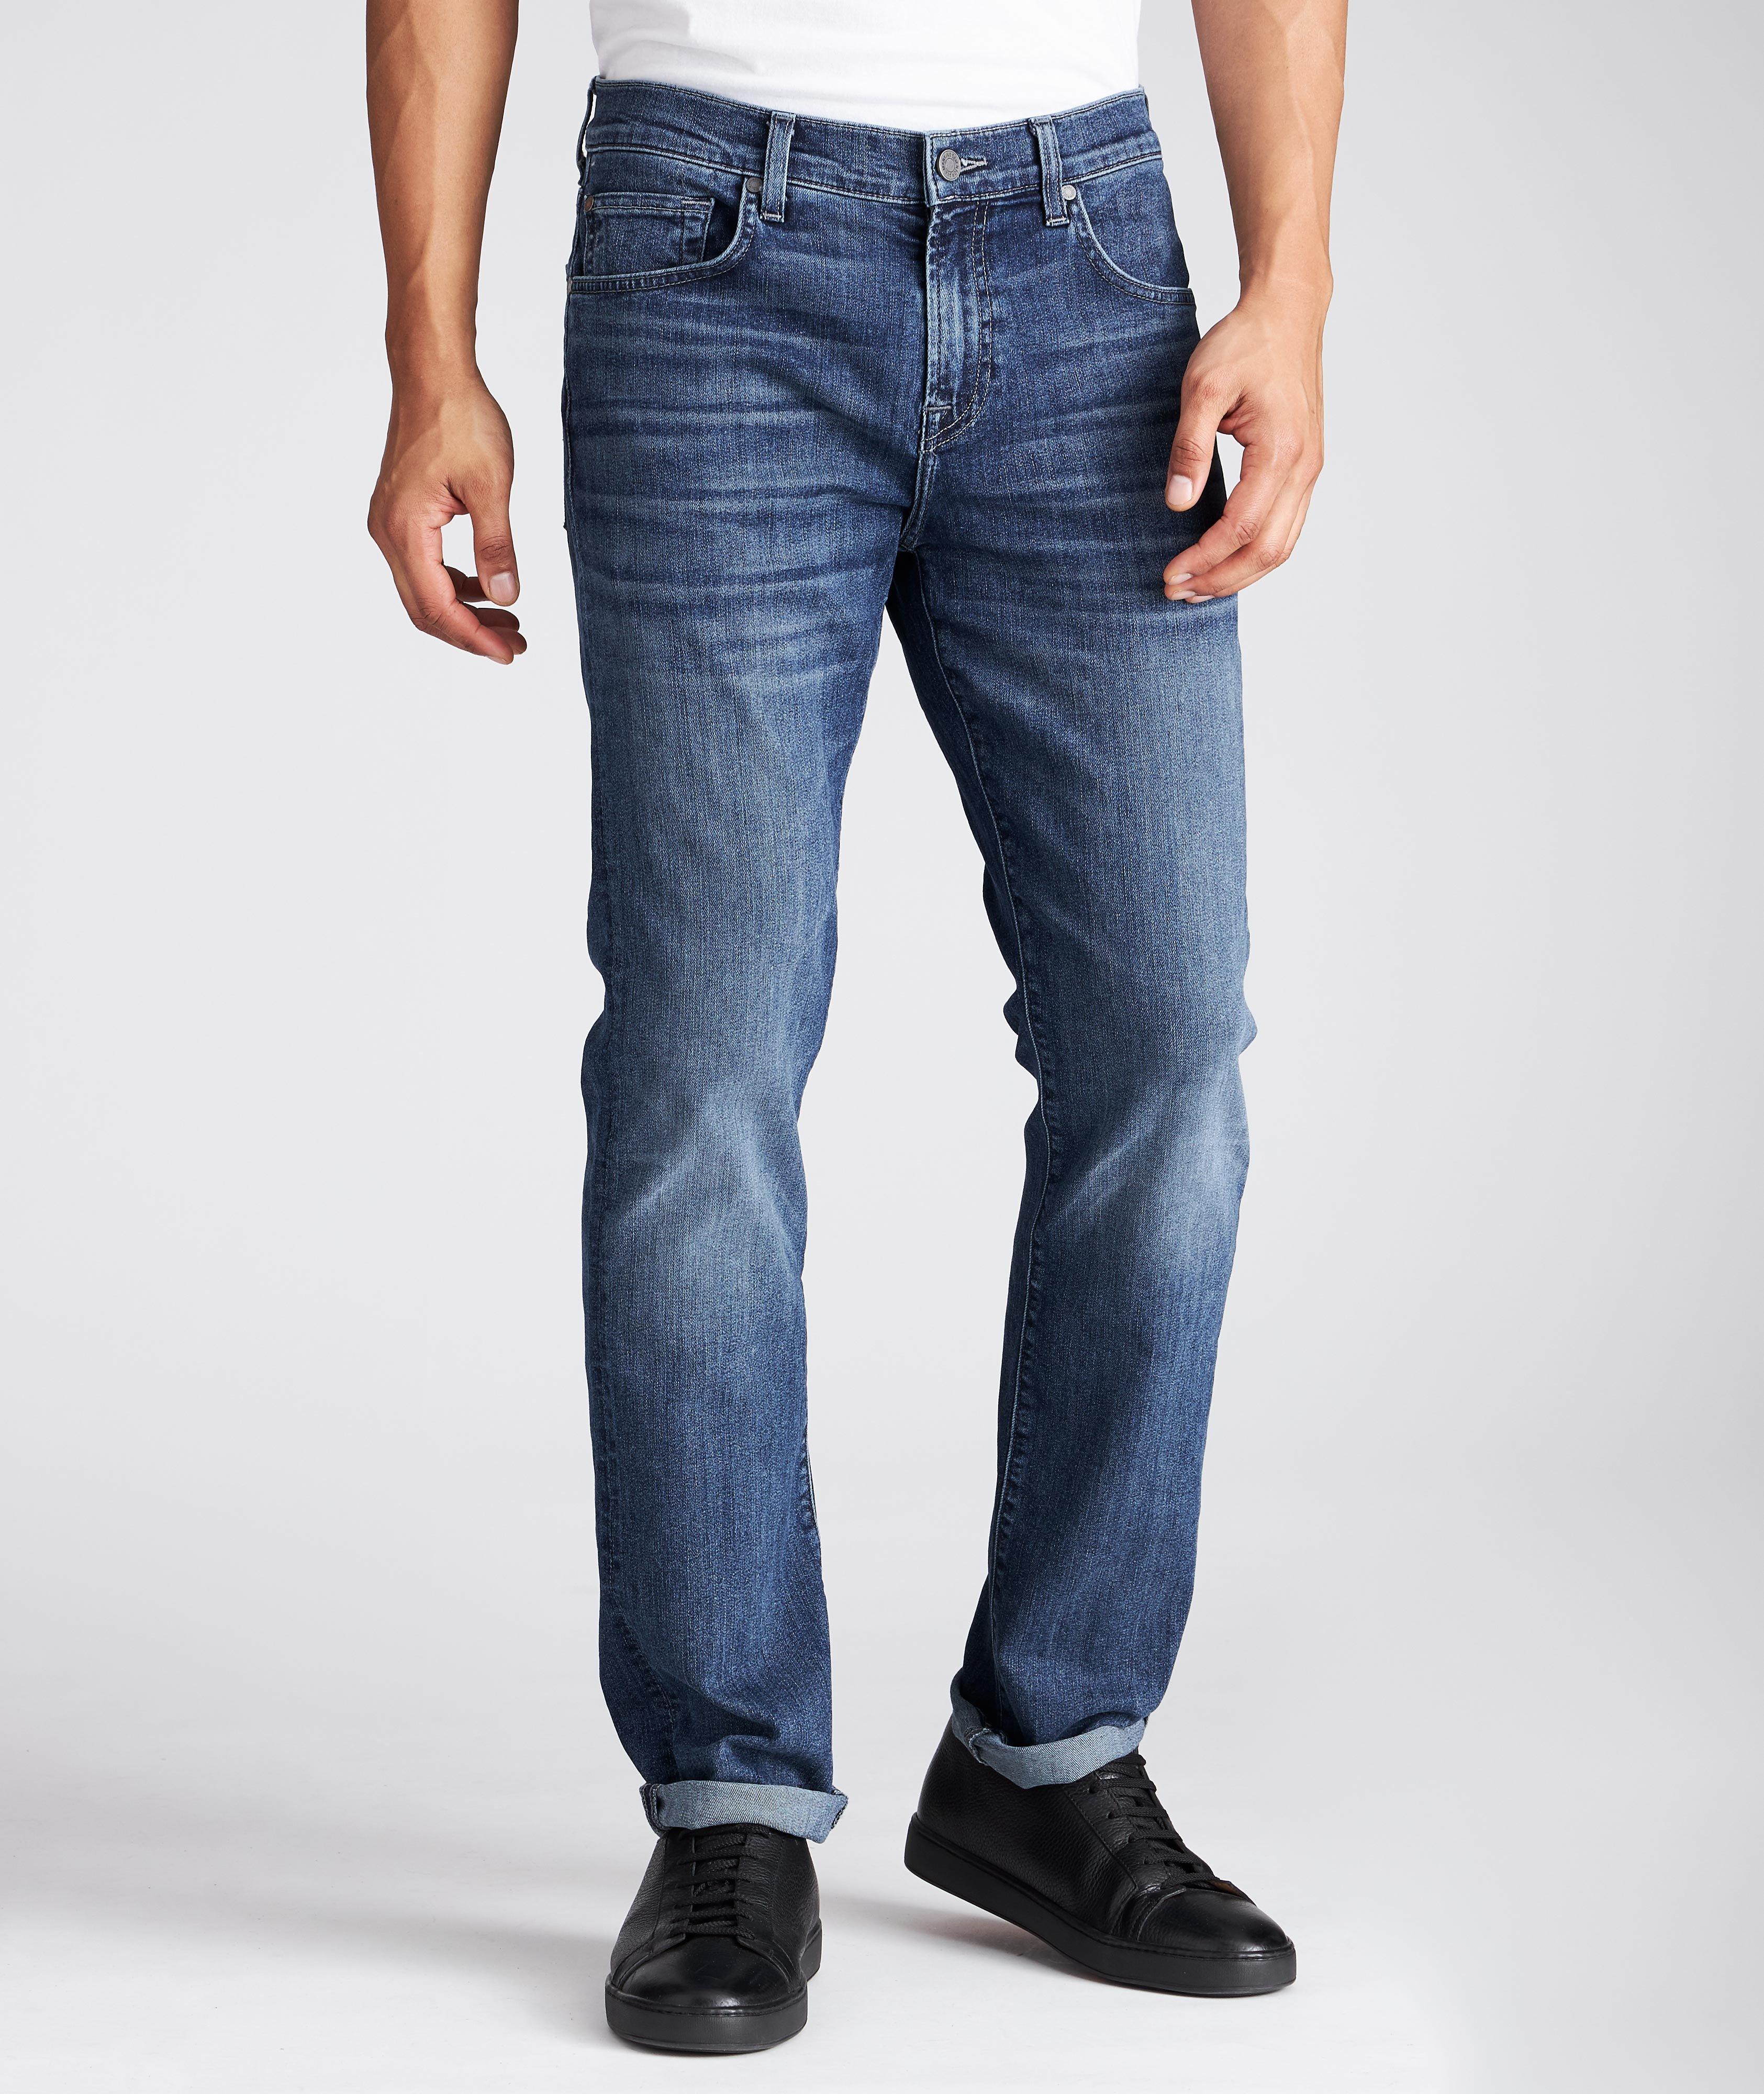 Straight Jeans image 0